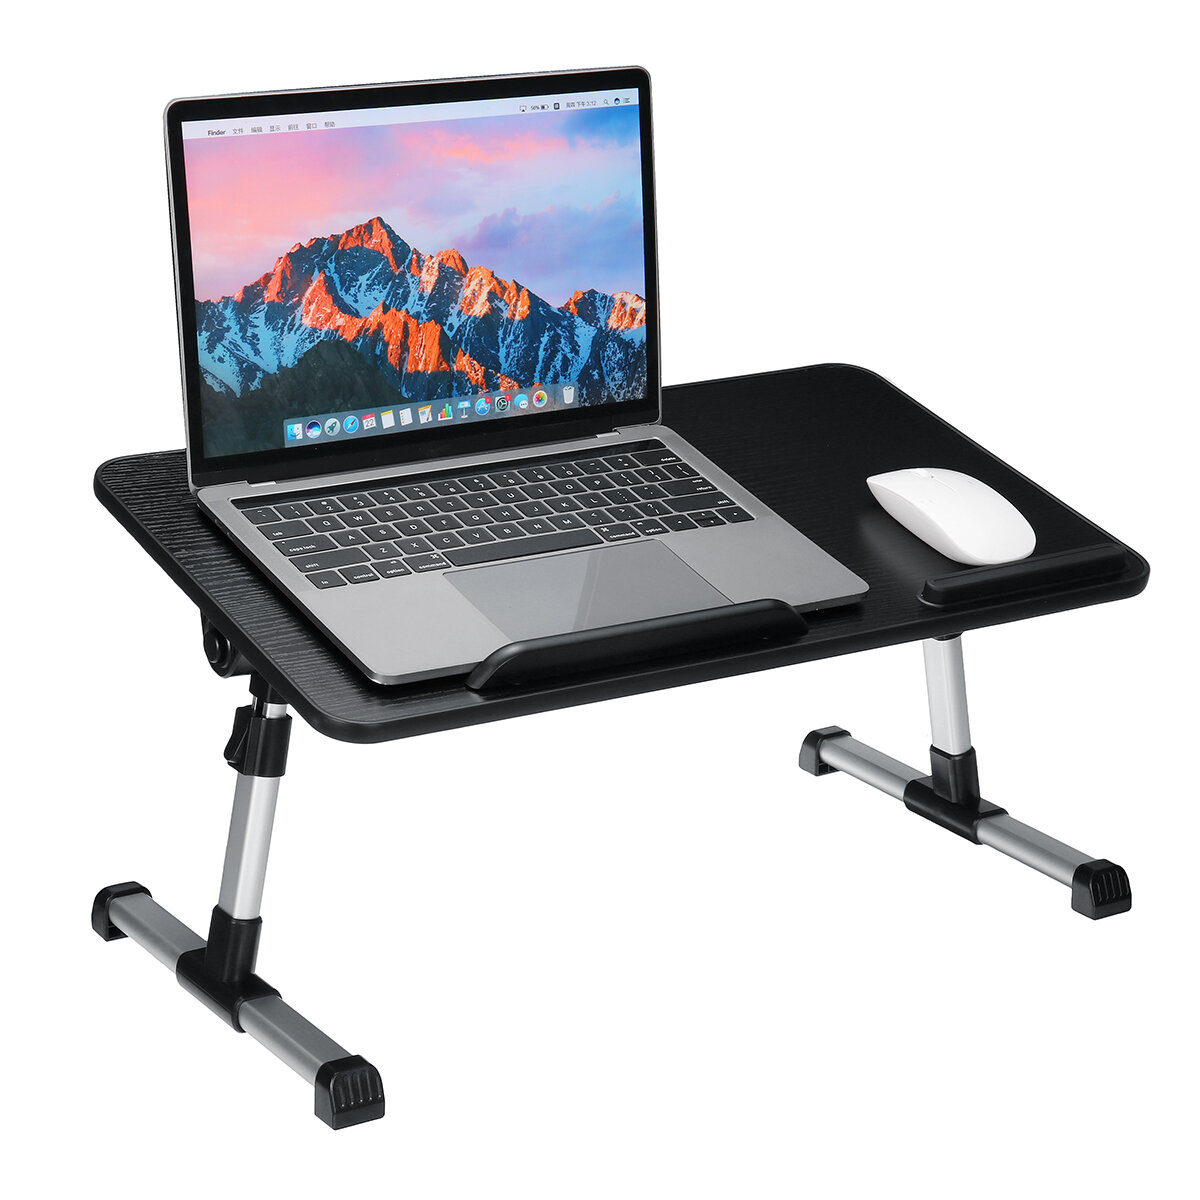 Foldable Laptop Desk Adjustable Height Computer Notebook Desk Breakfast Serving Table Bed Tray Home Office Furniture